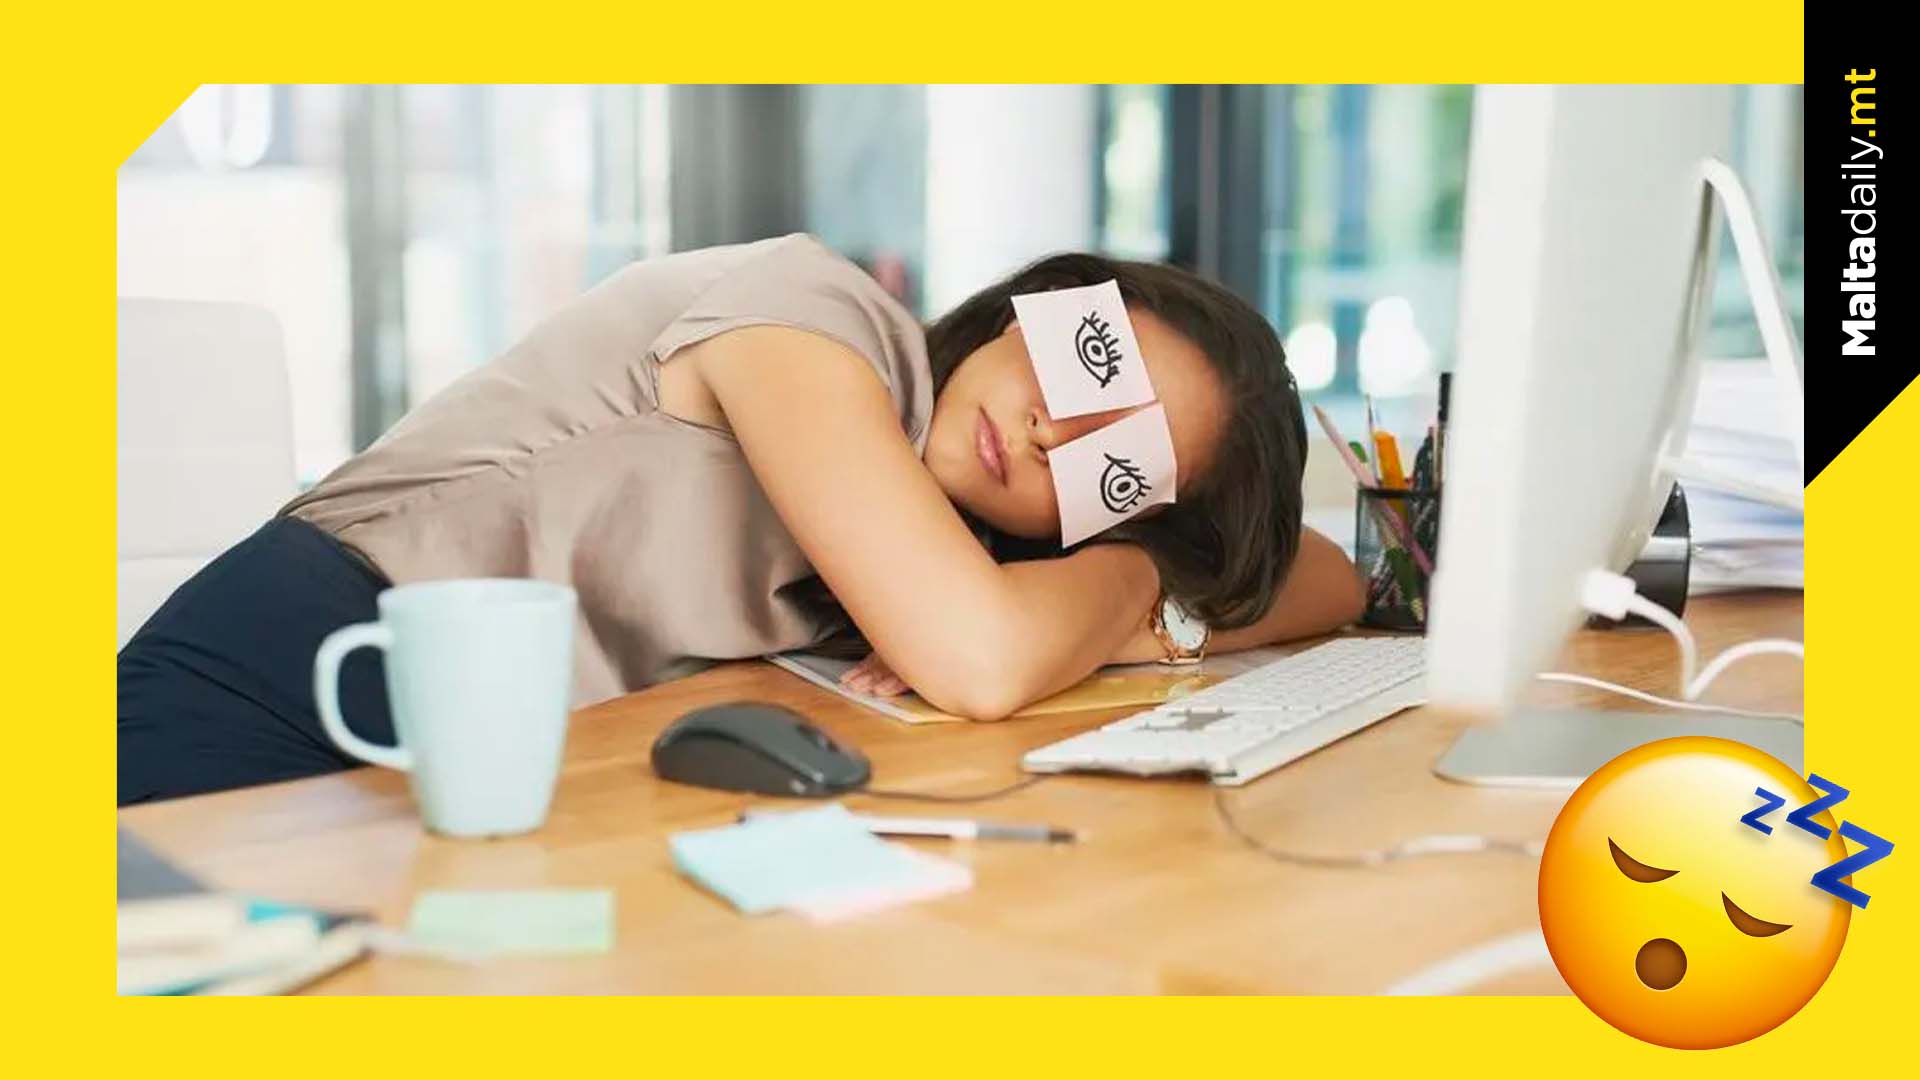 A quick nap may help you boost your work creativity